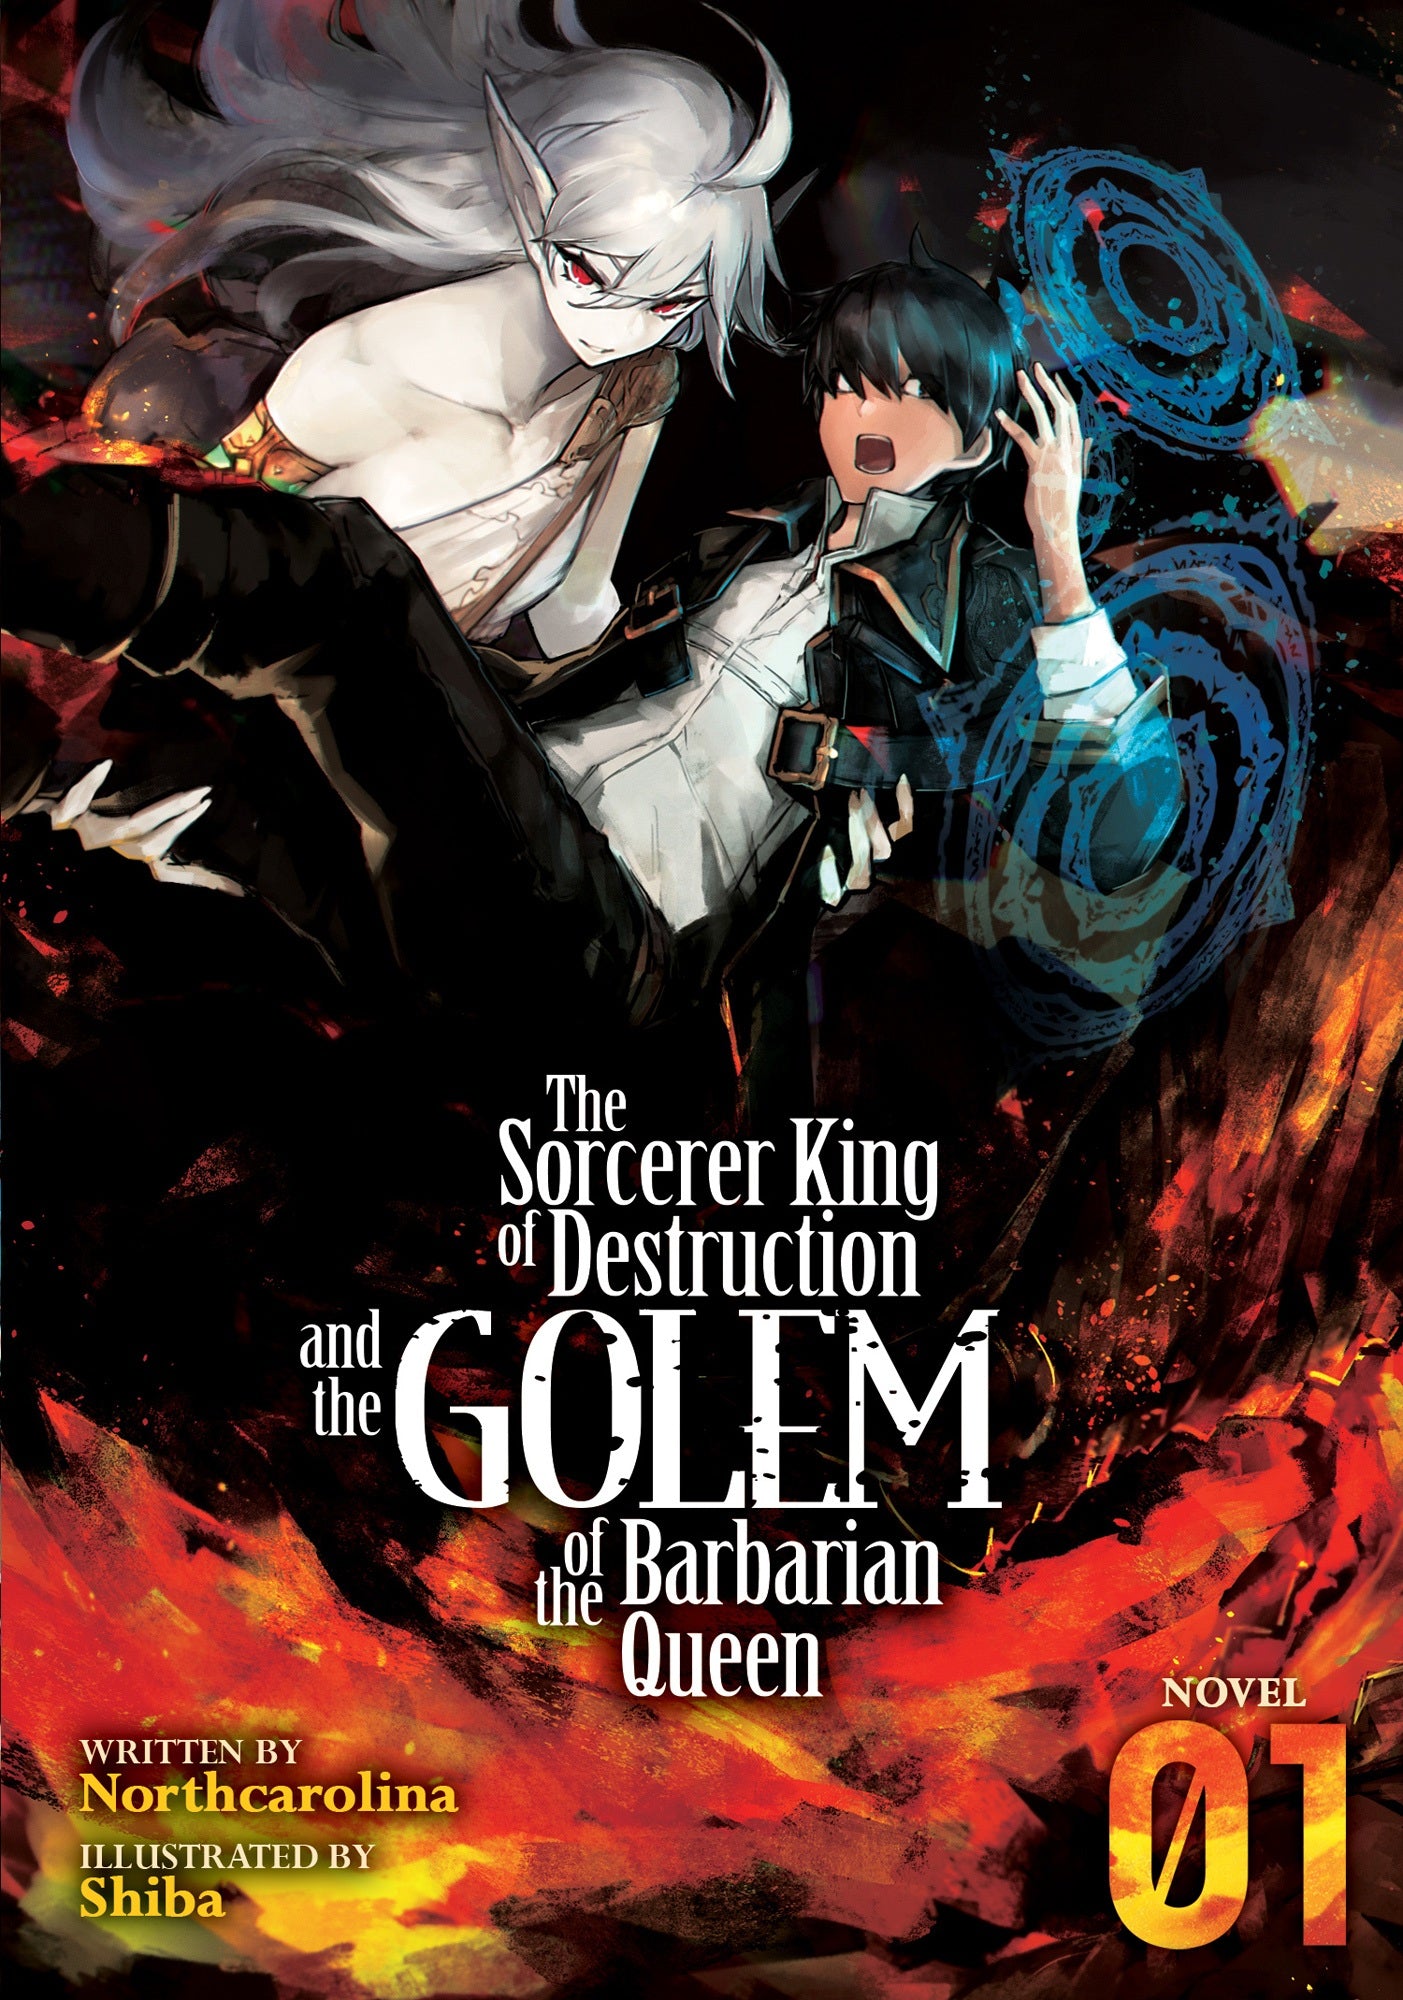 The Sorcerer King of Destruction and the Golem of the Barbarian Queen (Light Novel) Vol. 01